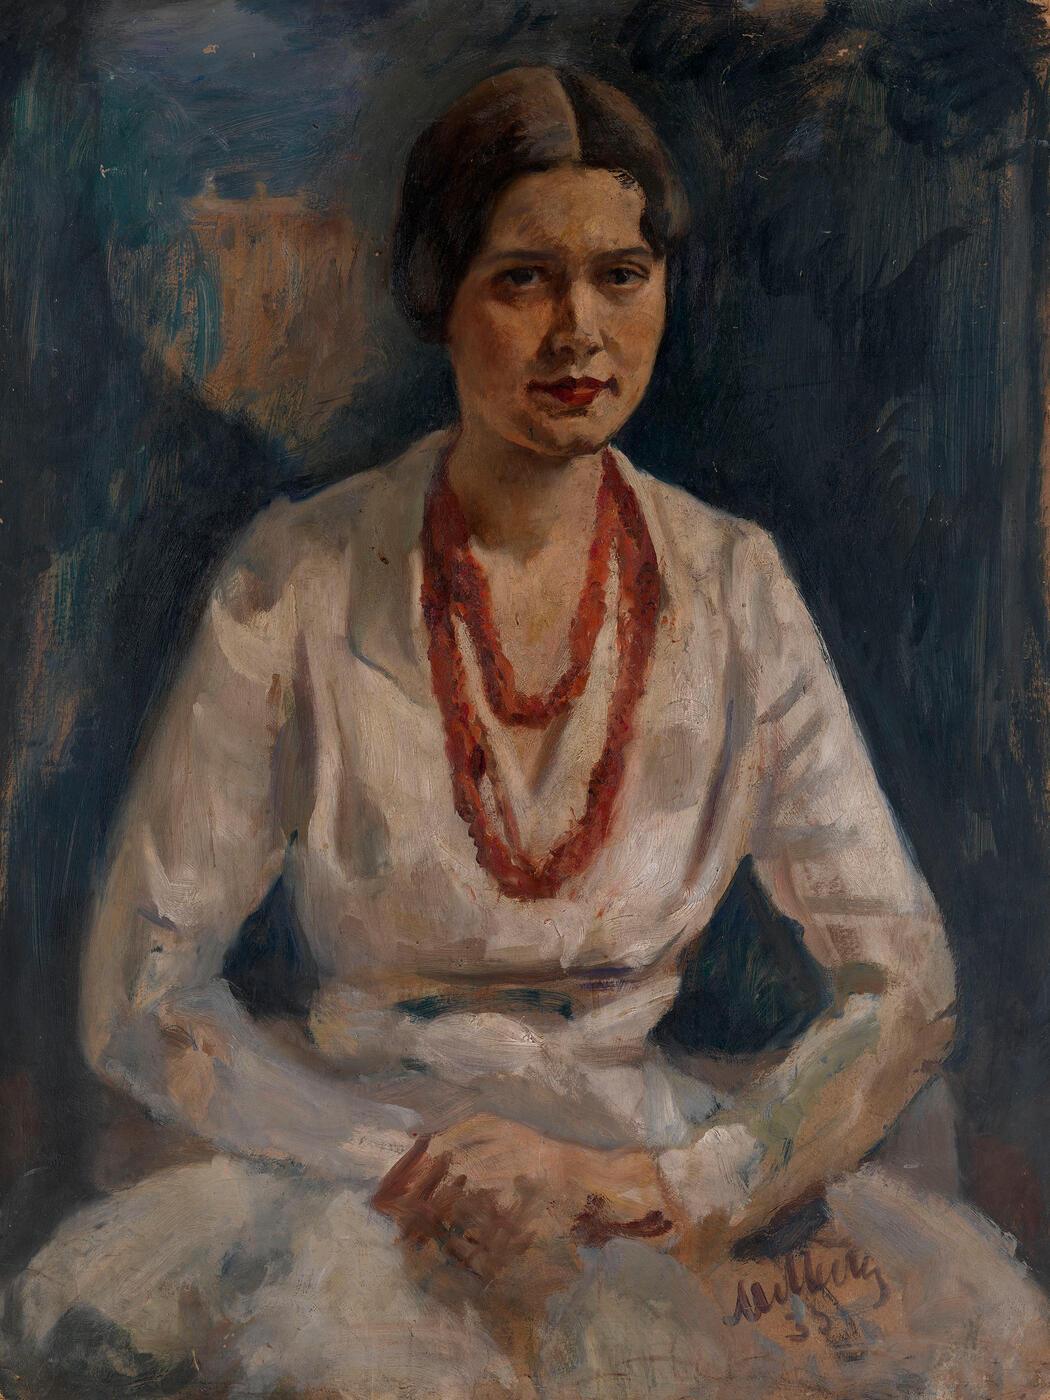 Portrait of a Woman with a Red Necklace